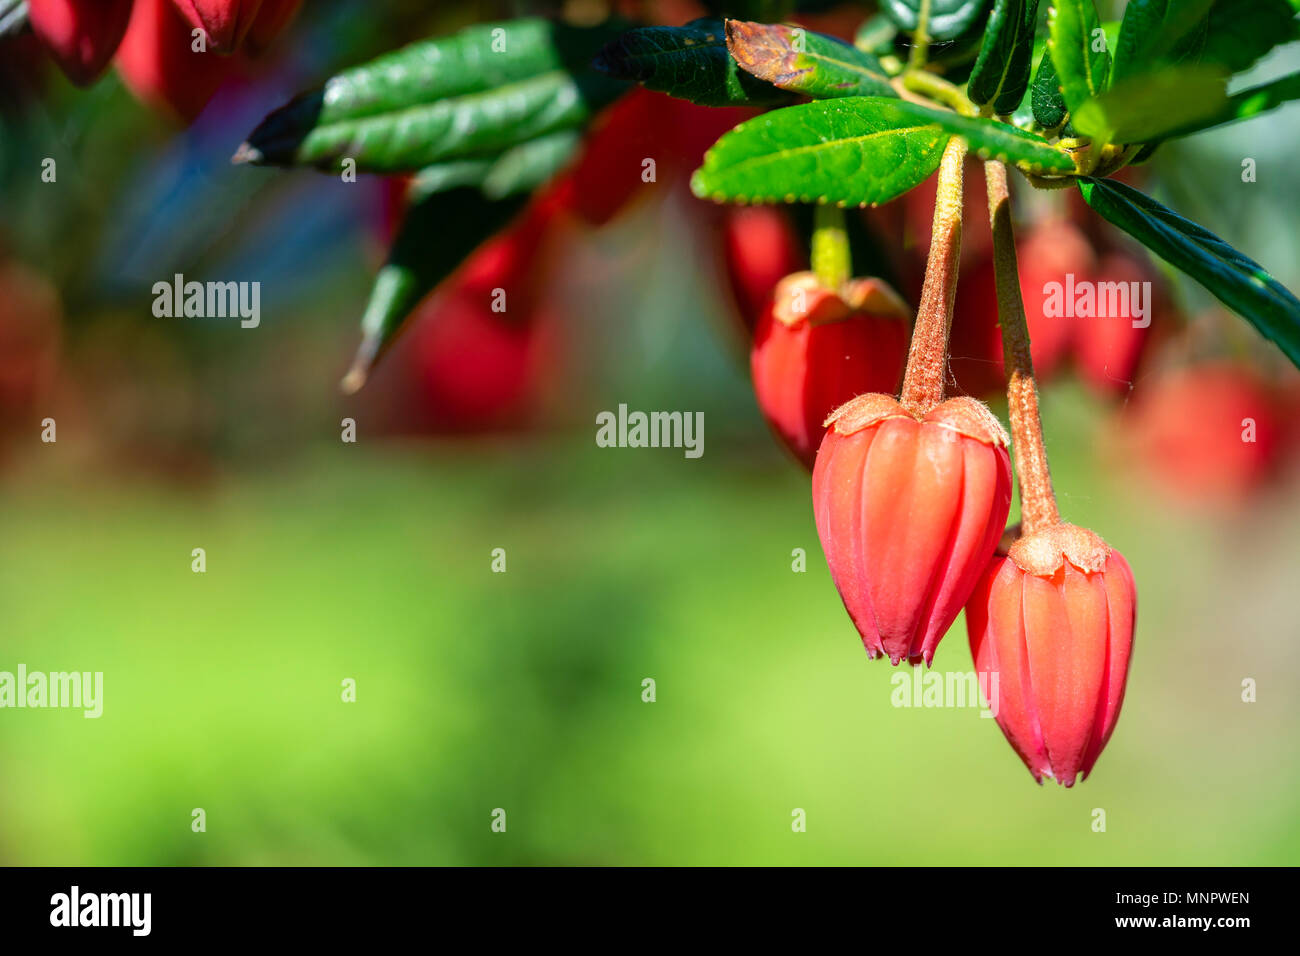 The red (crimson) coloured drooping flowers of a Crinodendron hookerianum, also known as Chilean Lantern Tree, an evergreen shrub/ small tree, UK Stock Photo